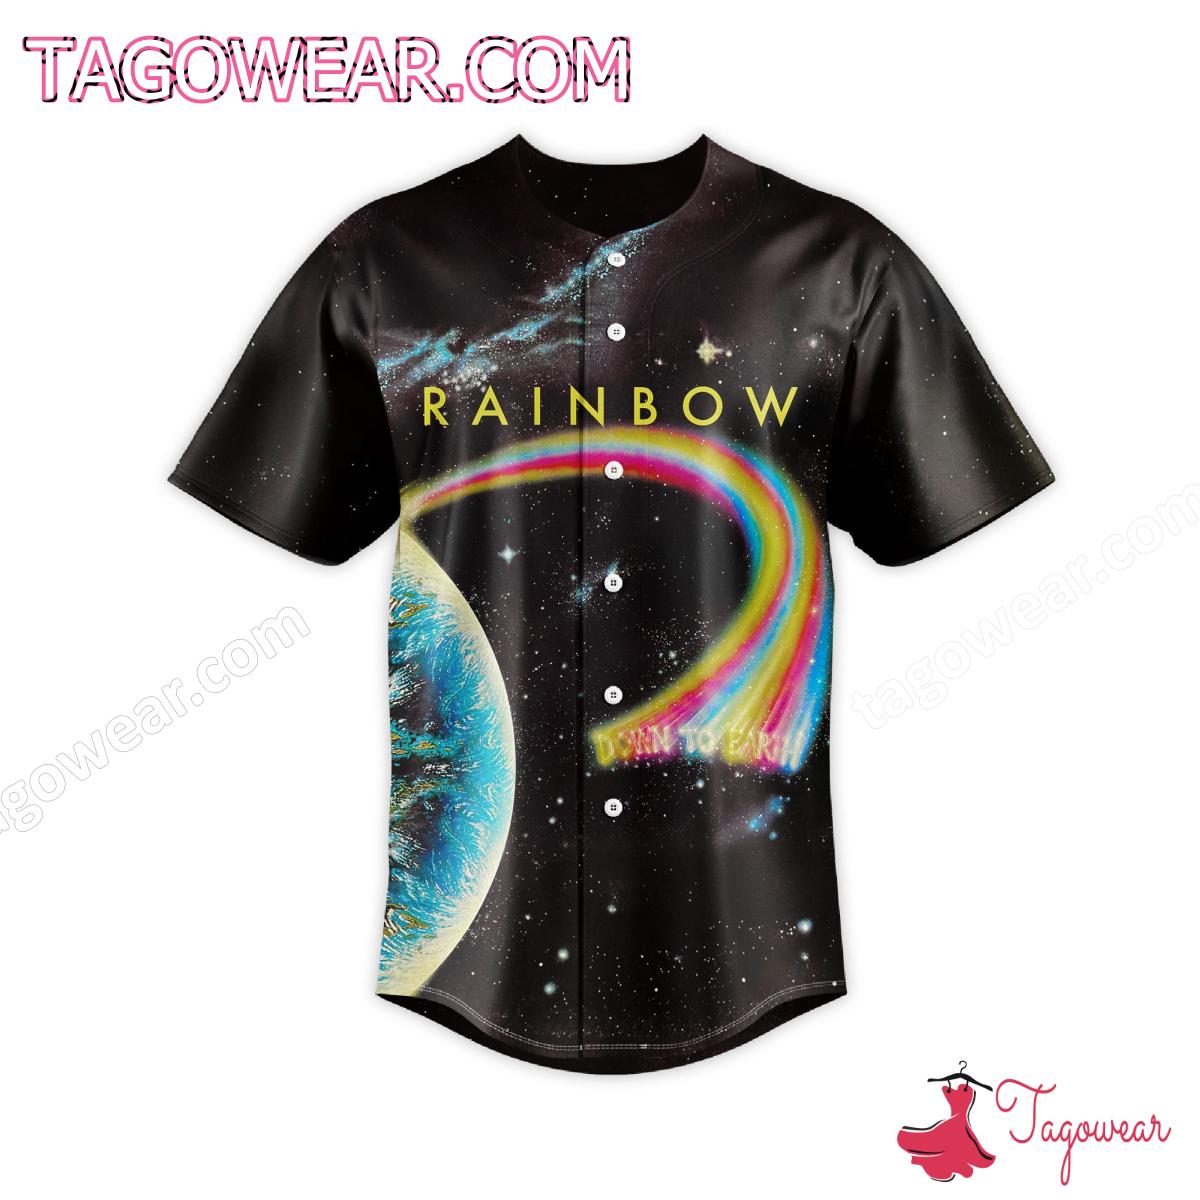 Rainbow Down To Earth Album Cover Baseball Jersey a